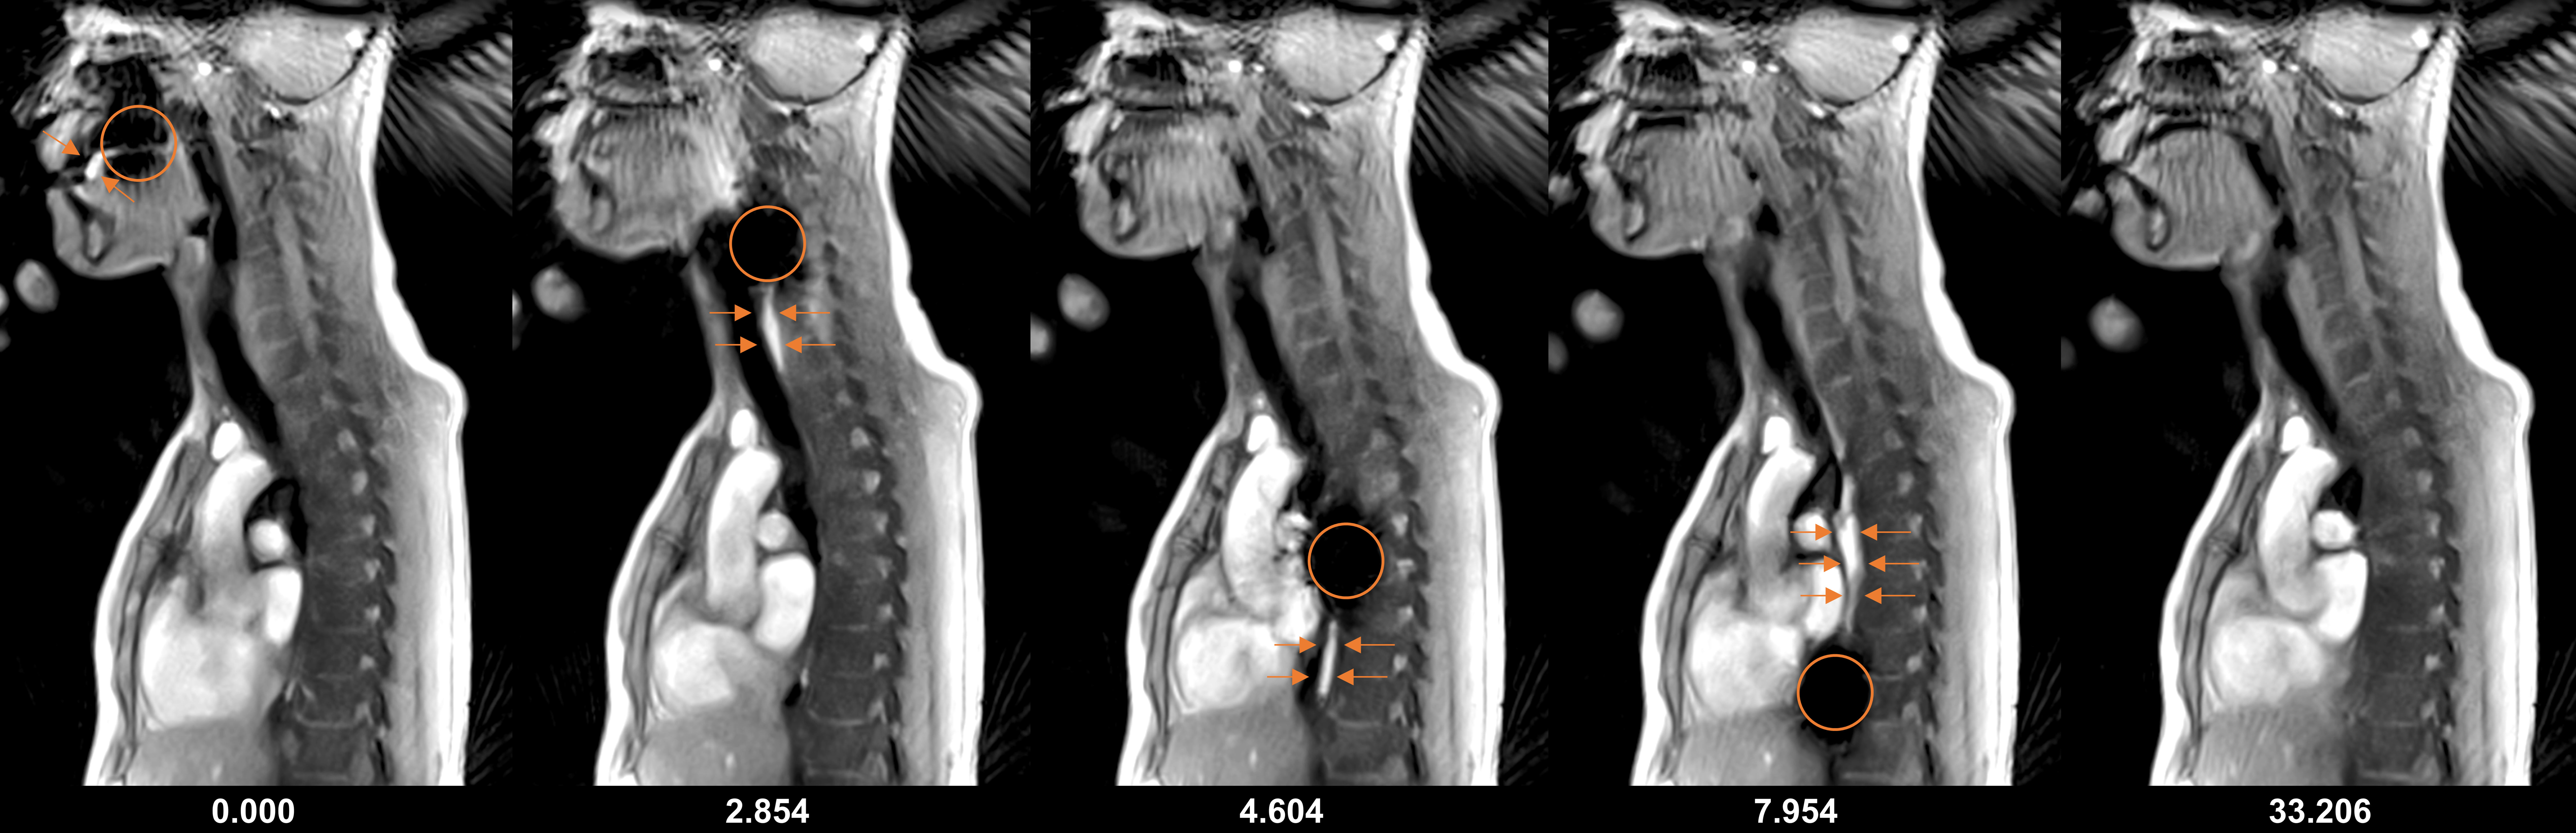 Sequential MRI scans of a human neck displayed side by side, with each image highlighting different areas with orange arrows and circles depicting the swallowing process.